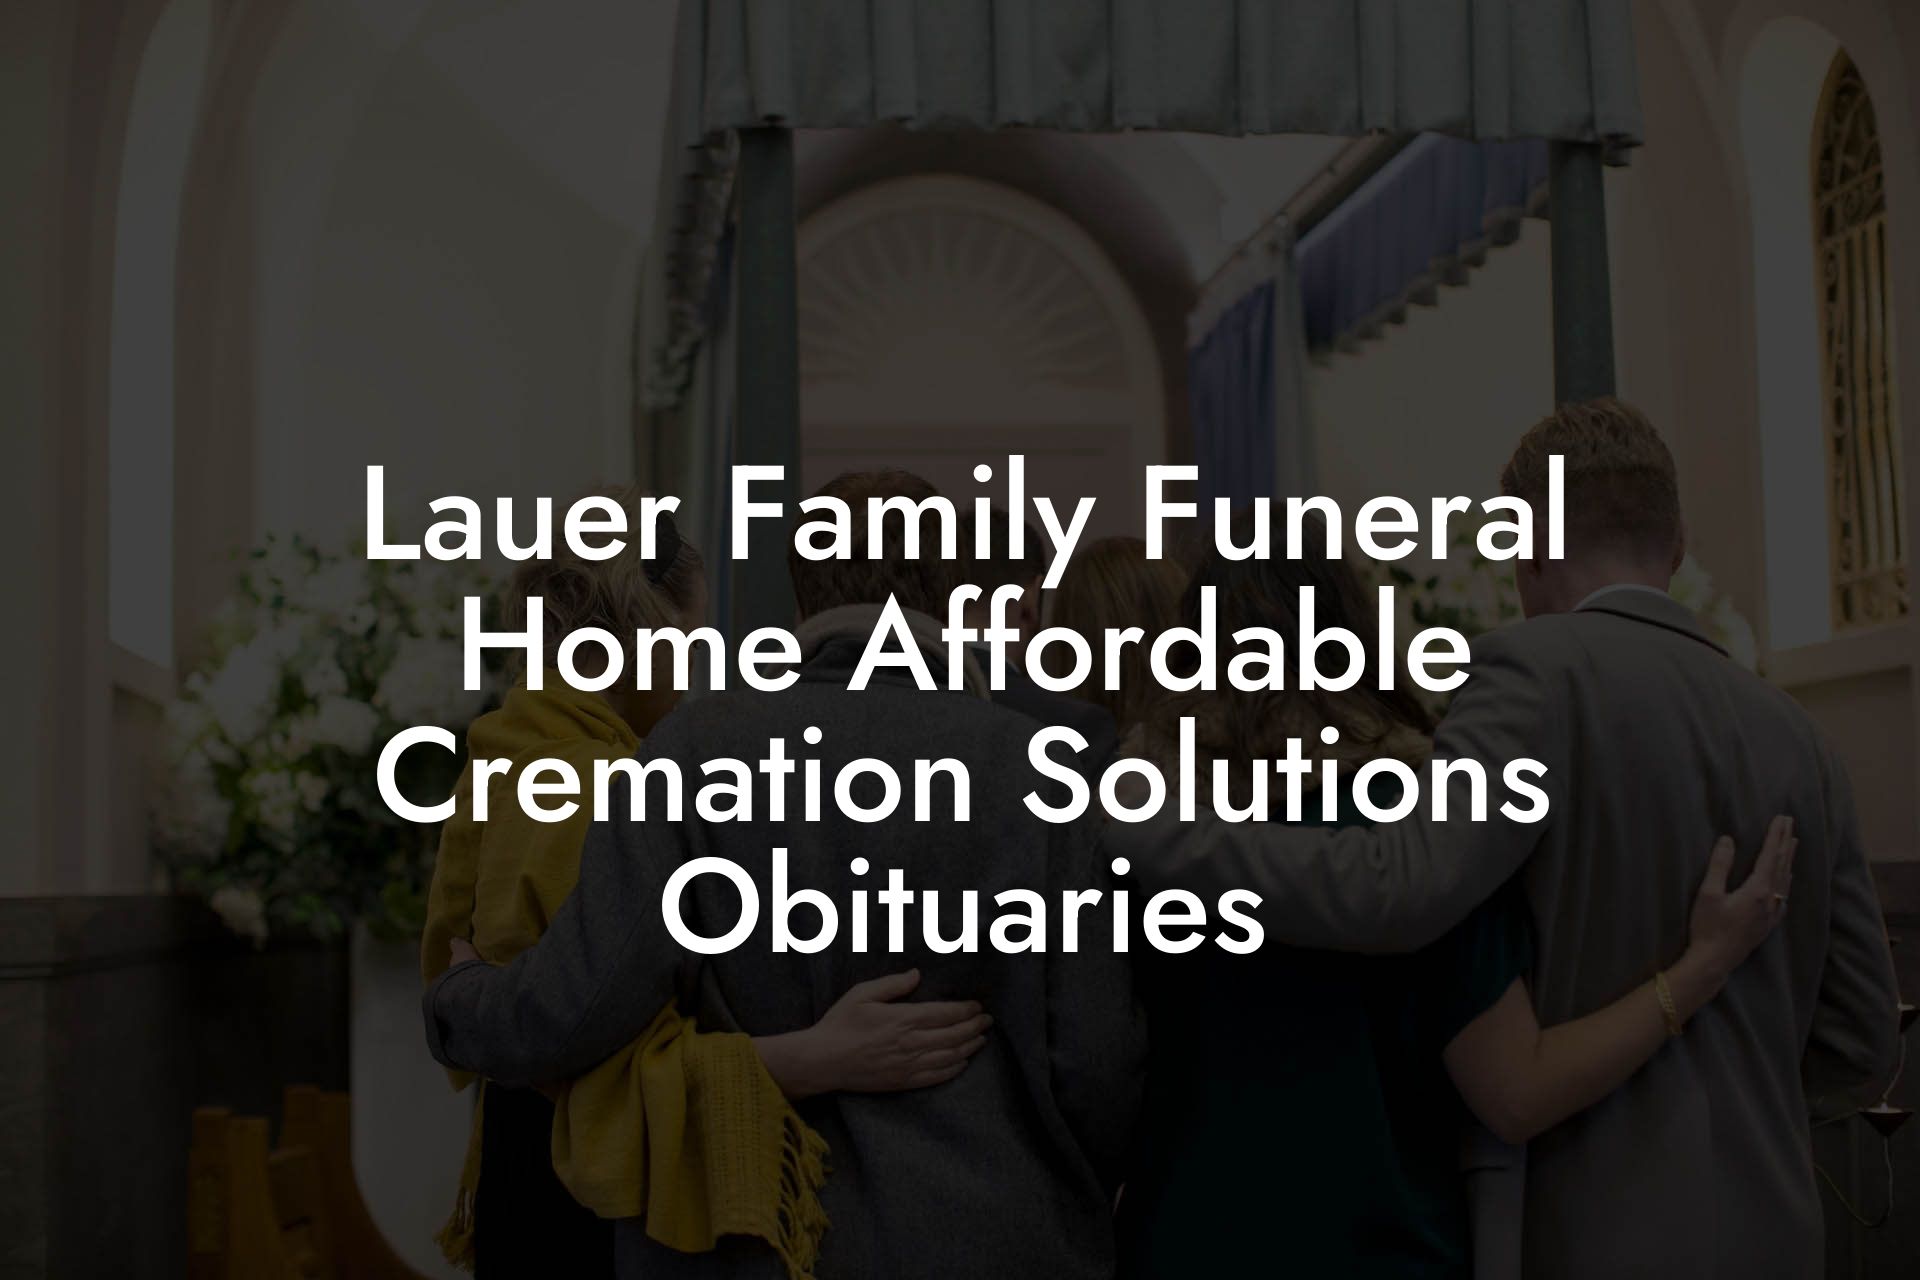 Lauer Family Funeral Home Affordable Cremation Solutions Obituaries